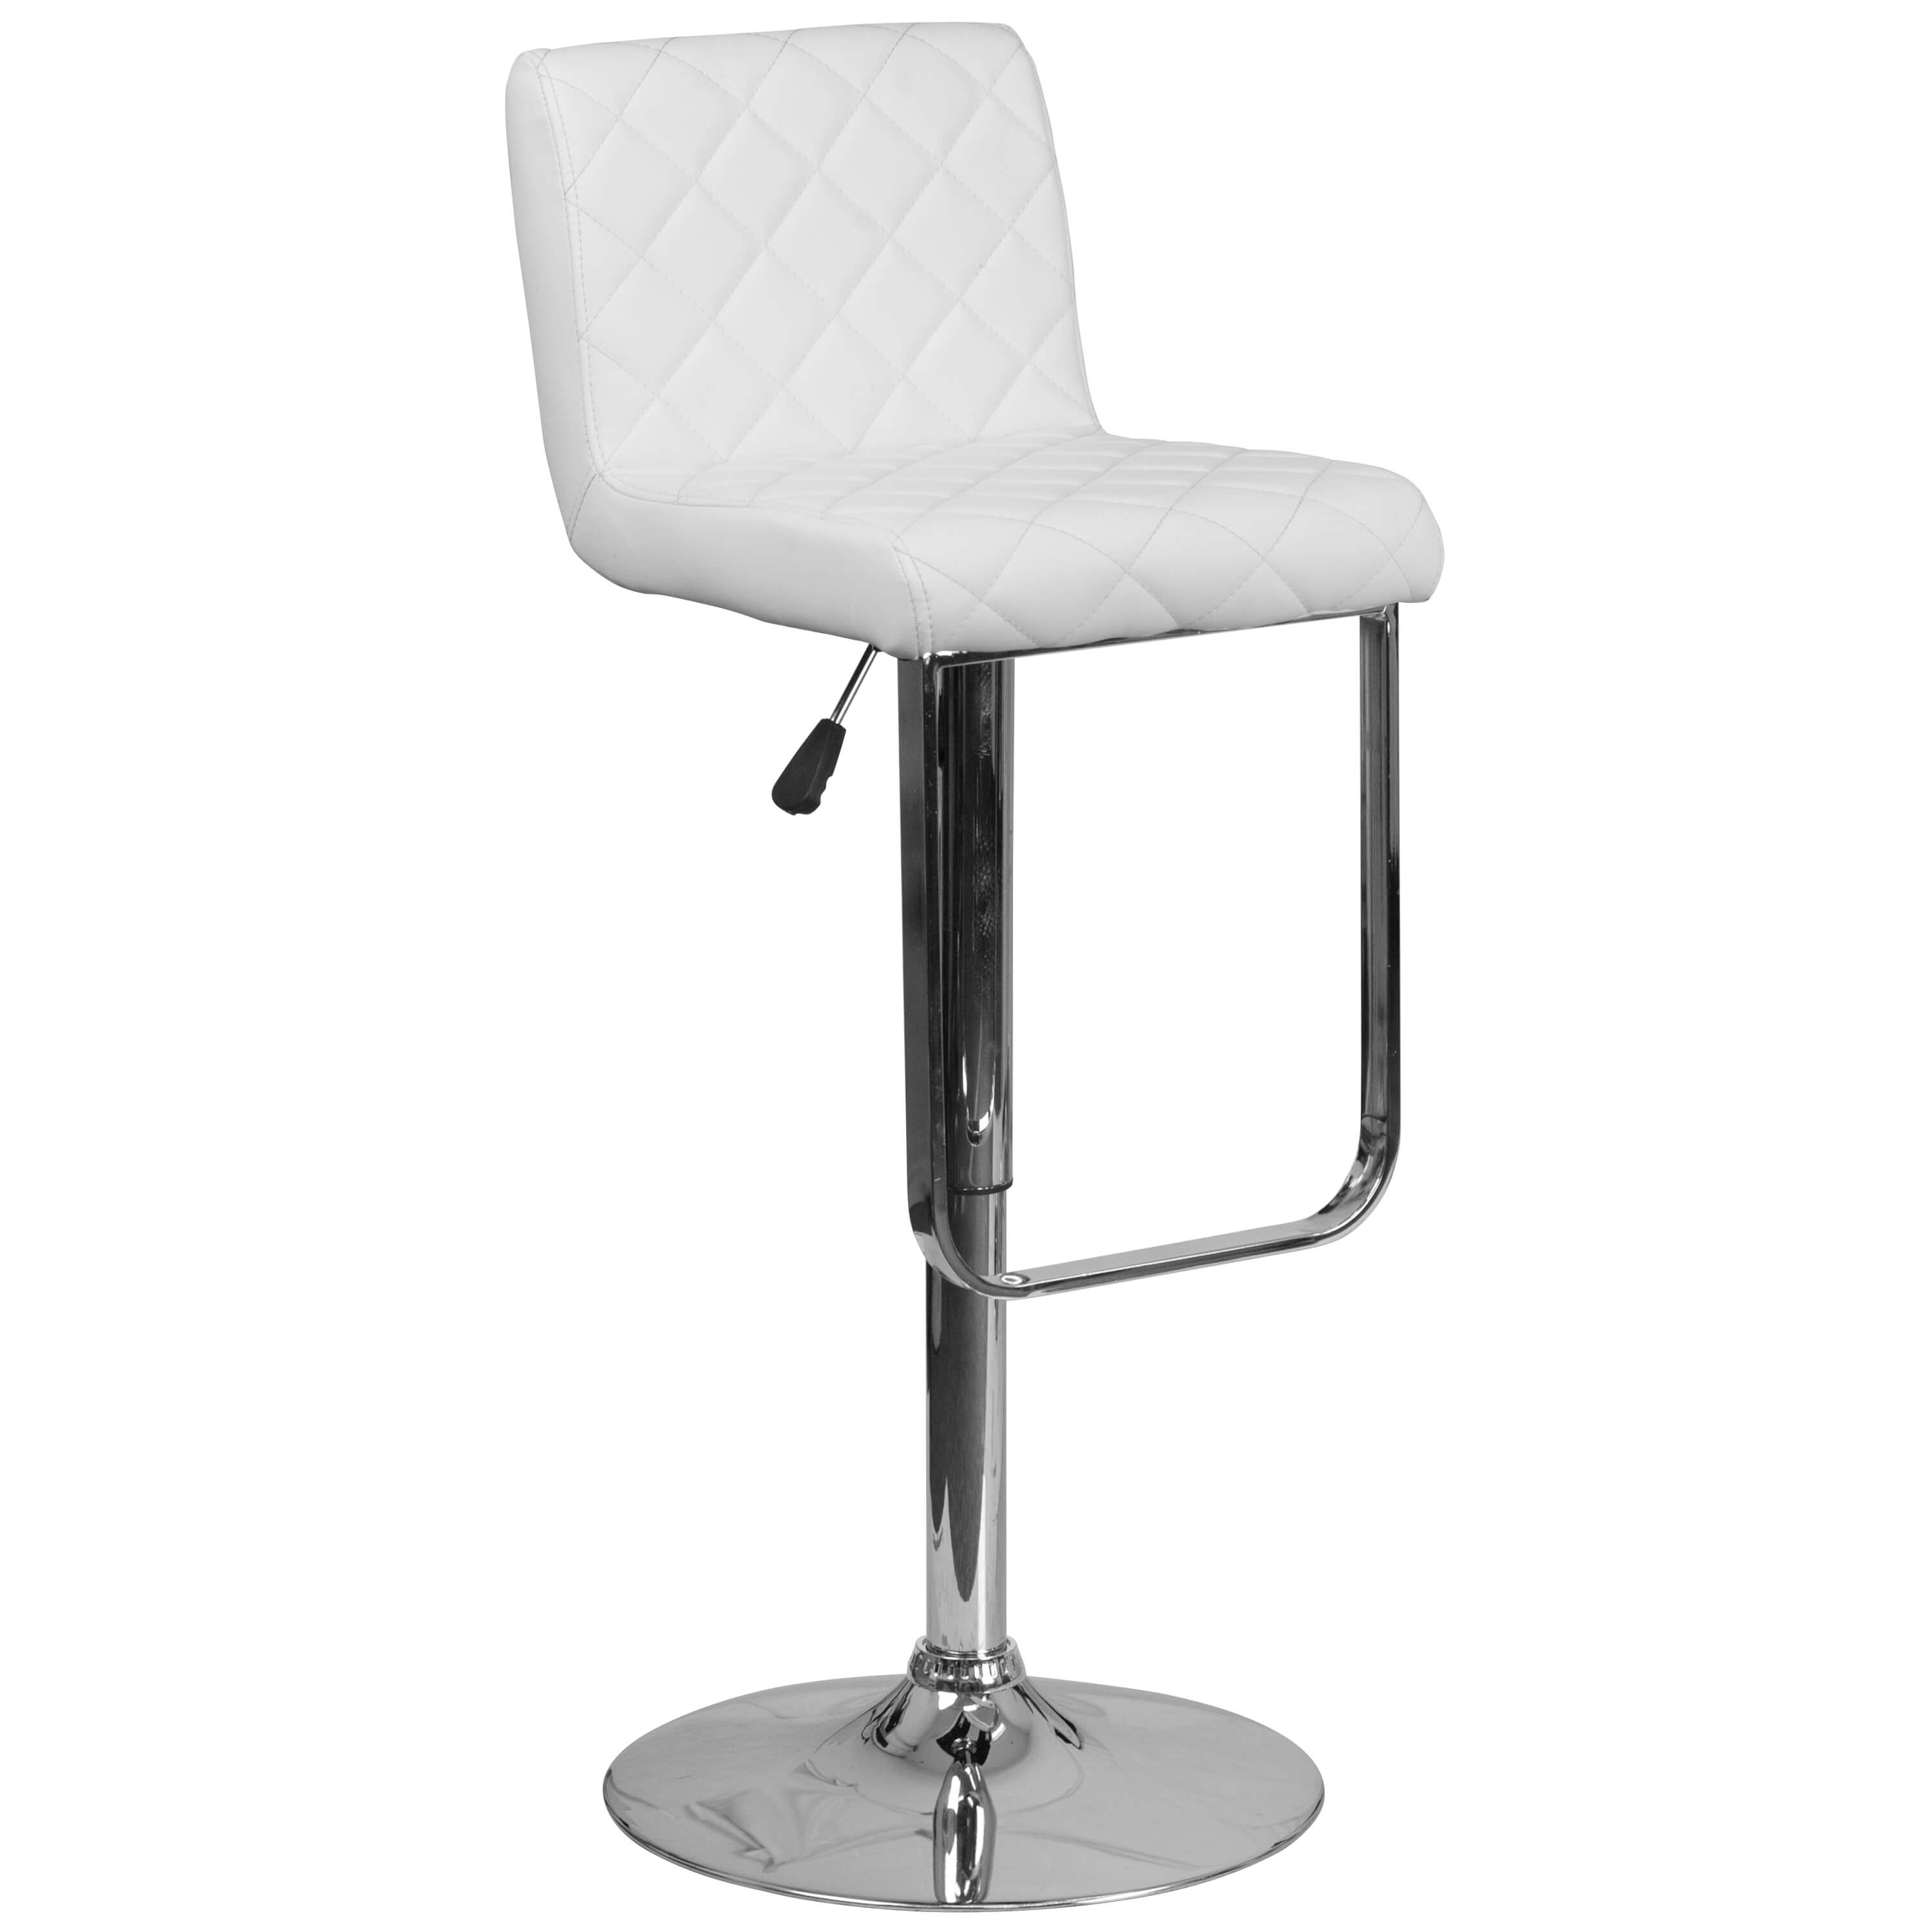 Cafe chairs CUB DS 8101 WH GG FLA